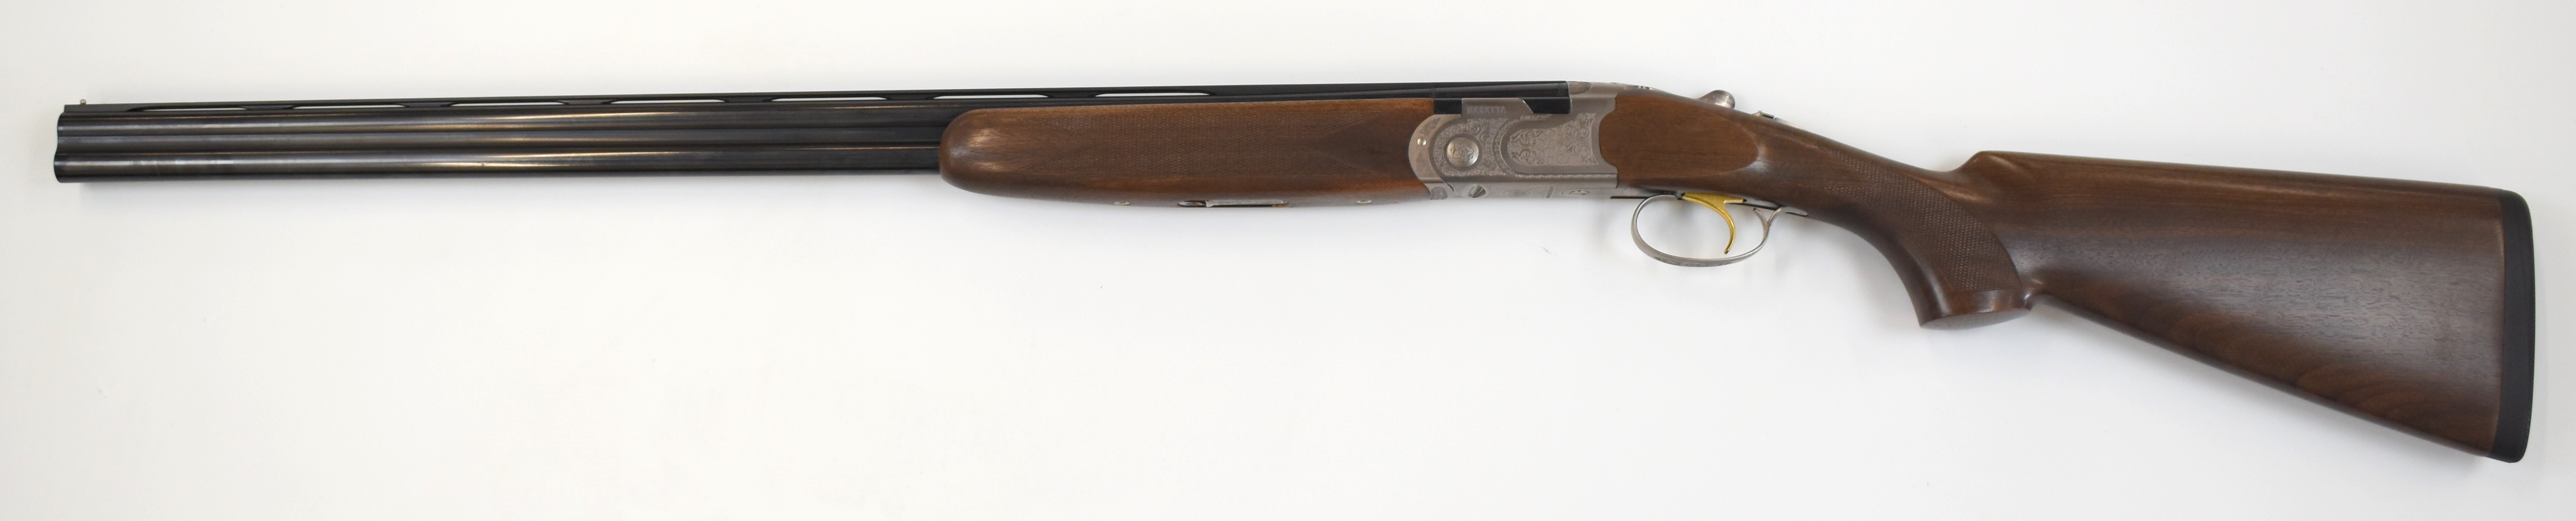 Beretta 686 Silver Pigeon I 28 bore over and under ejector shotgun with named and engraved lock - Image 23 of 28